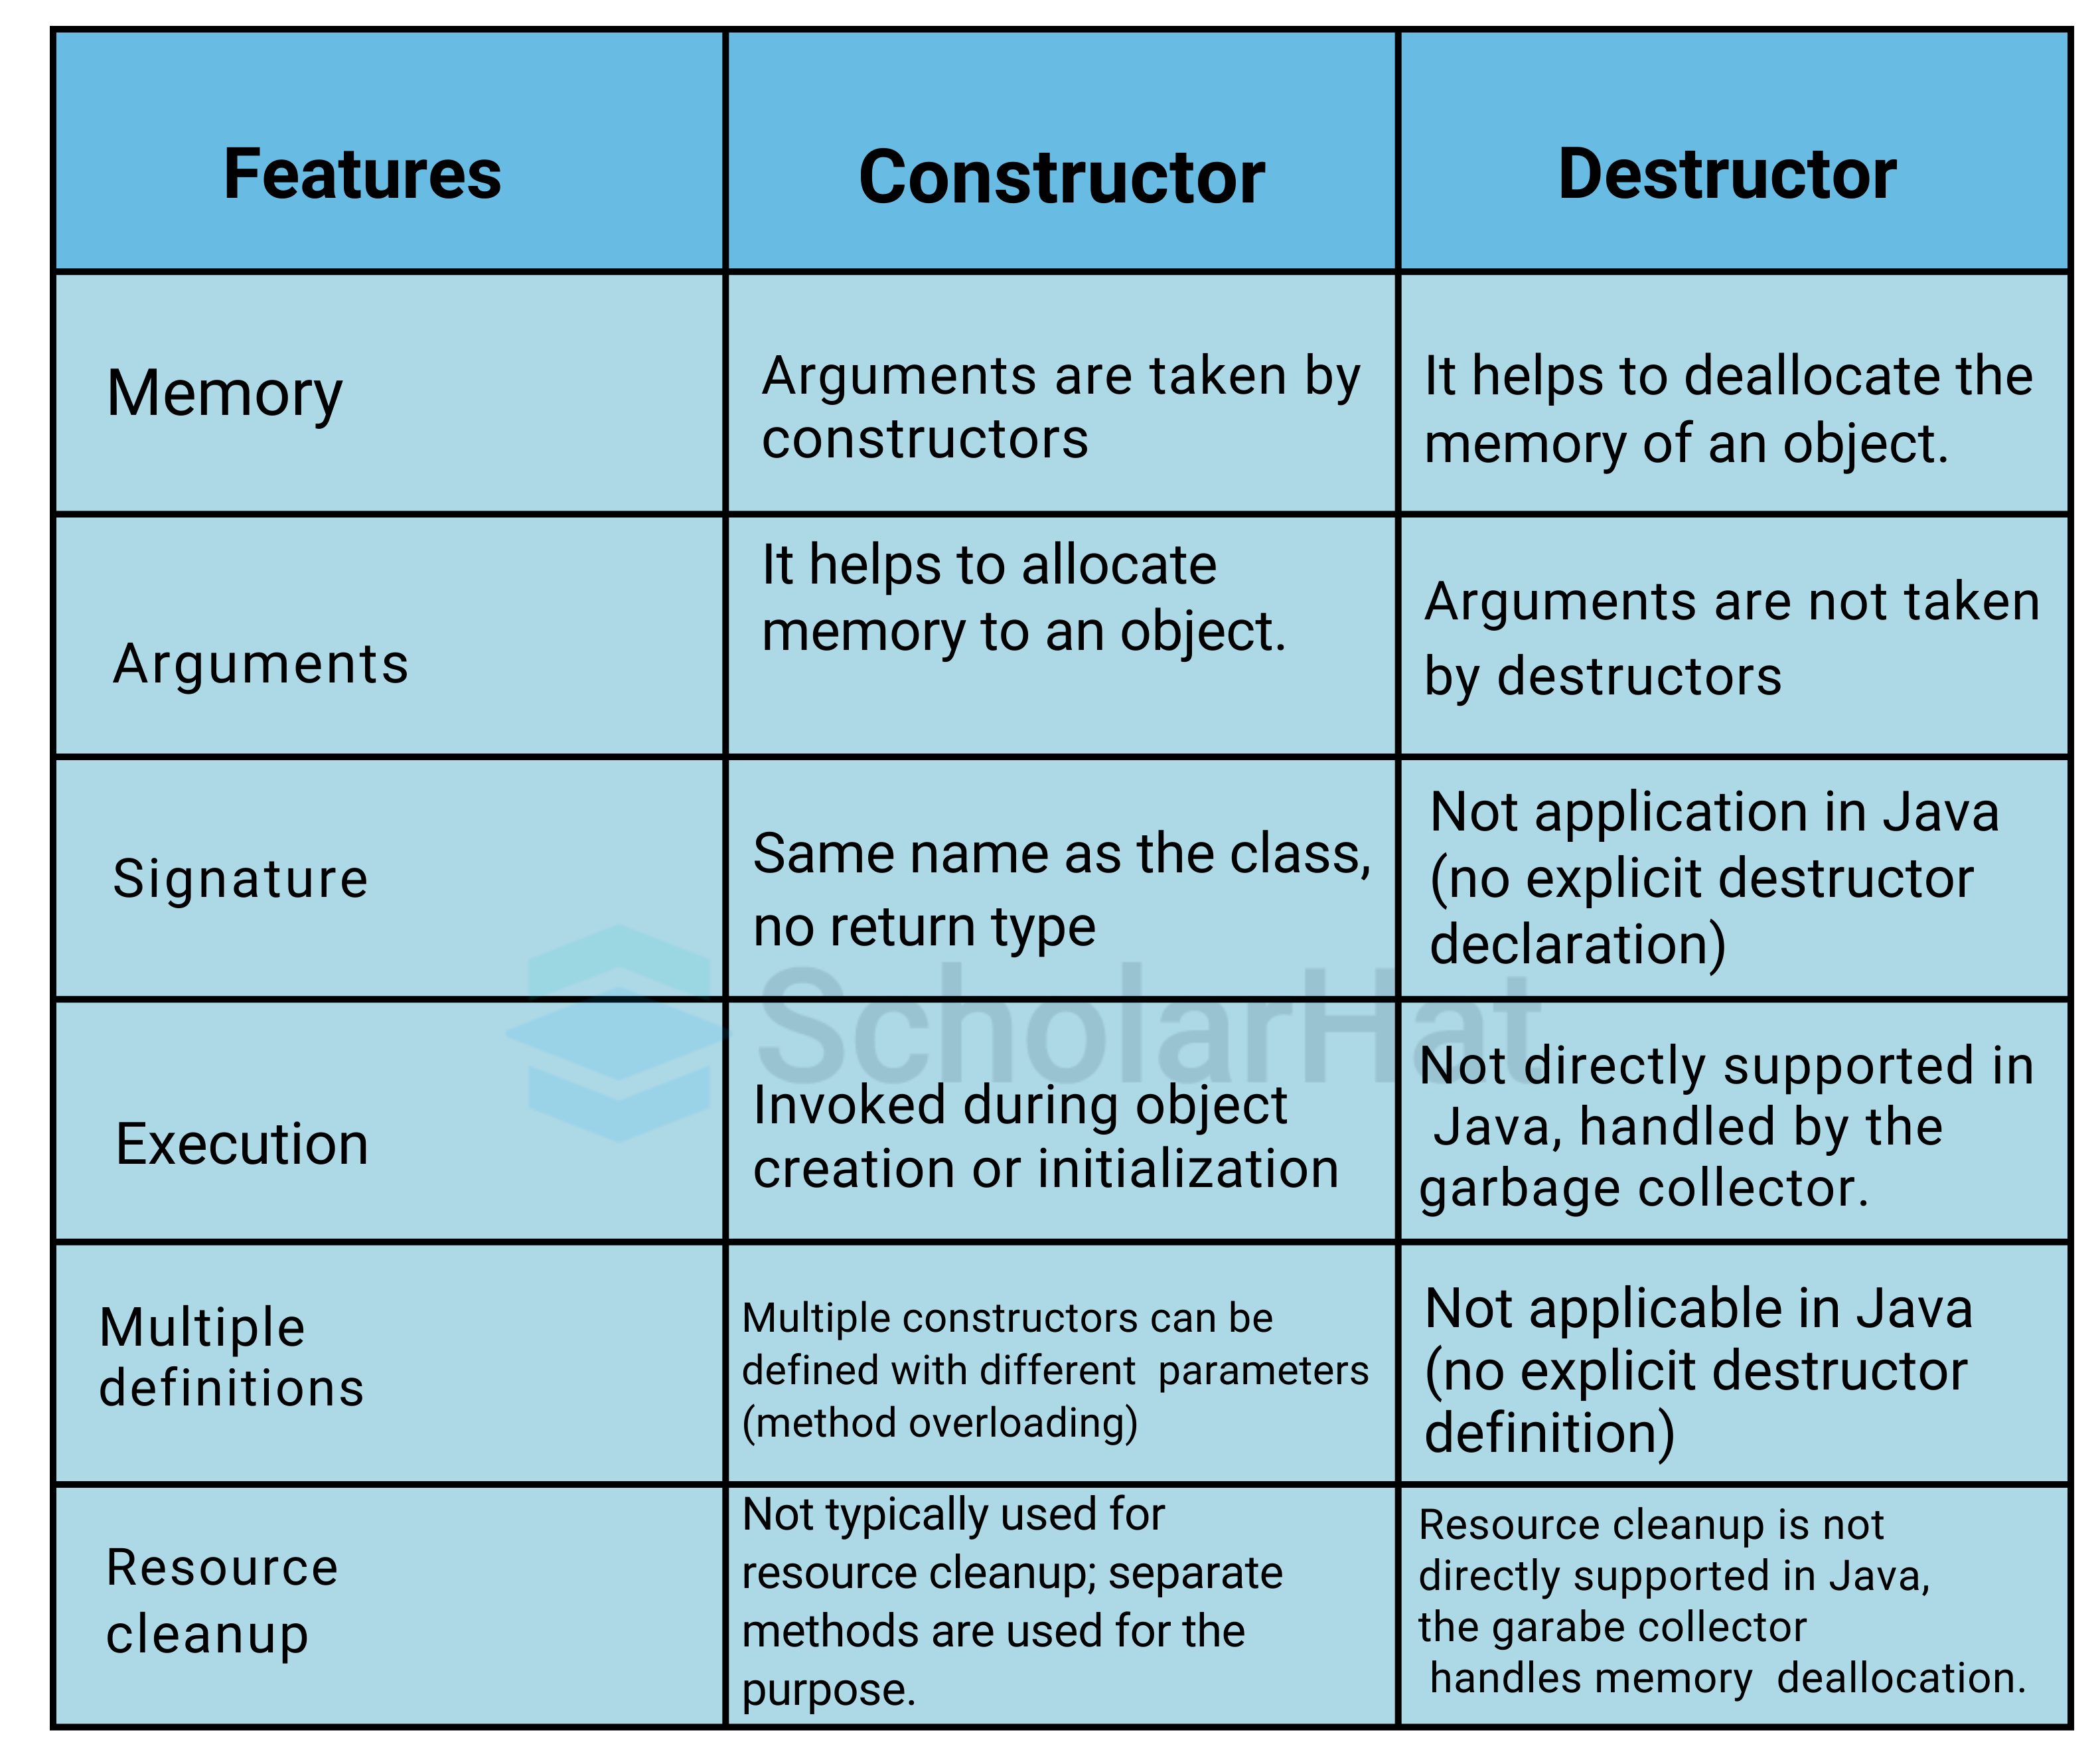 What is the difference between a constructor and a destructor in Java